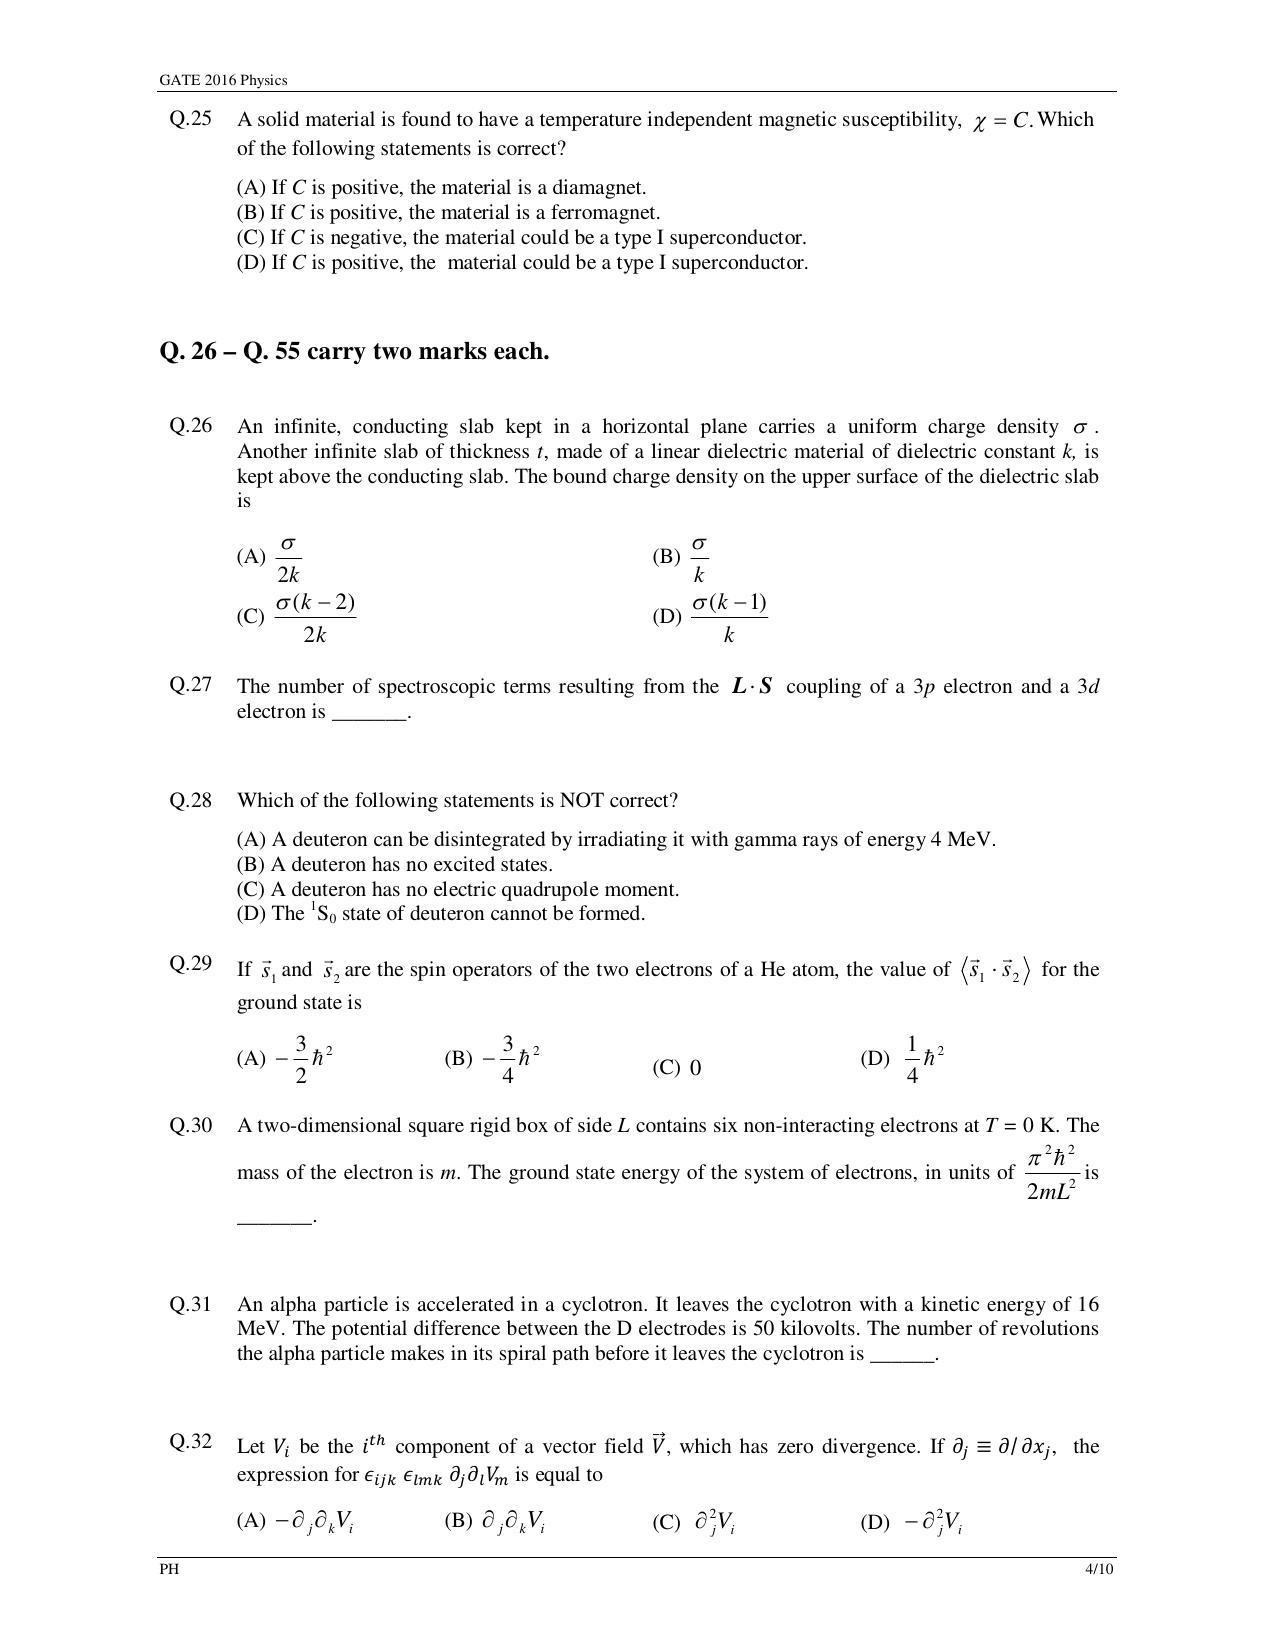 GATE 2016 Physics (PH) Question Paper with Answer Key - Page 7